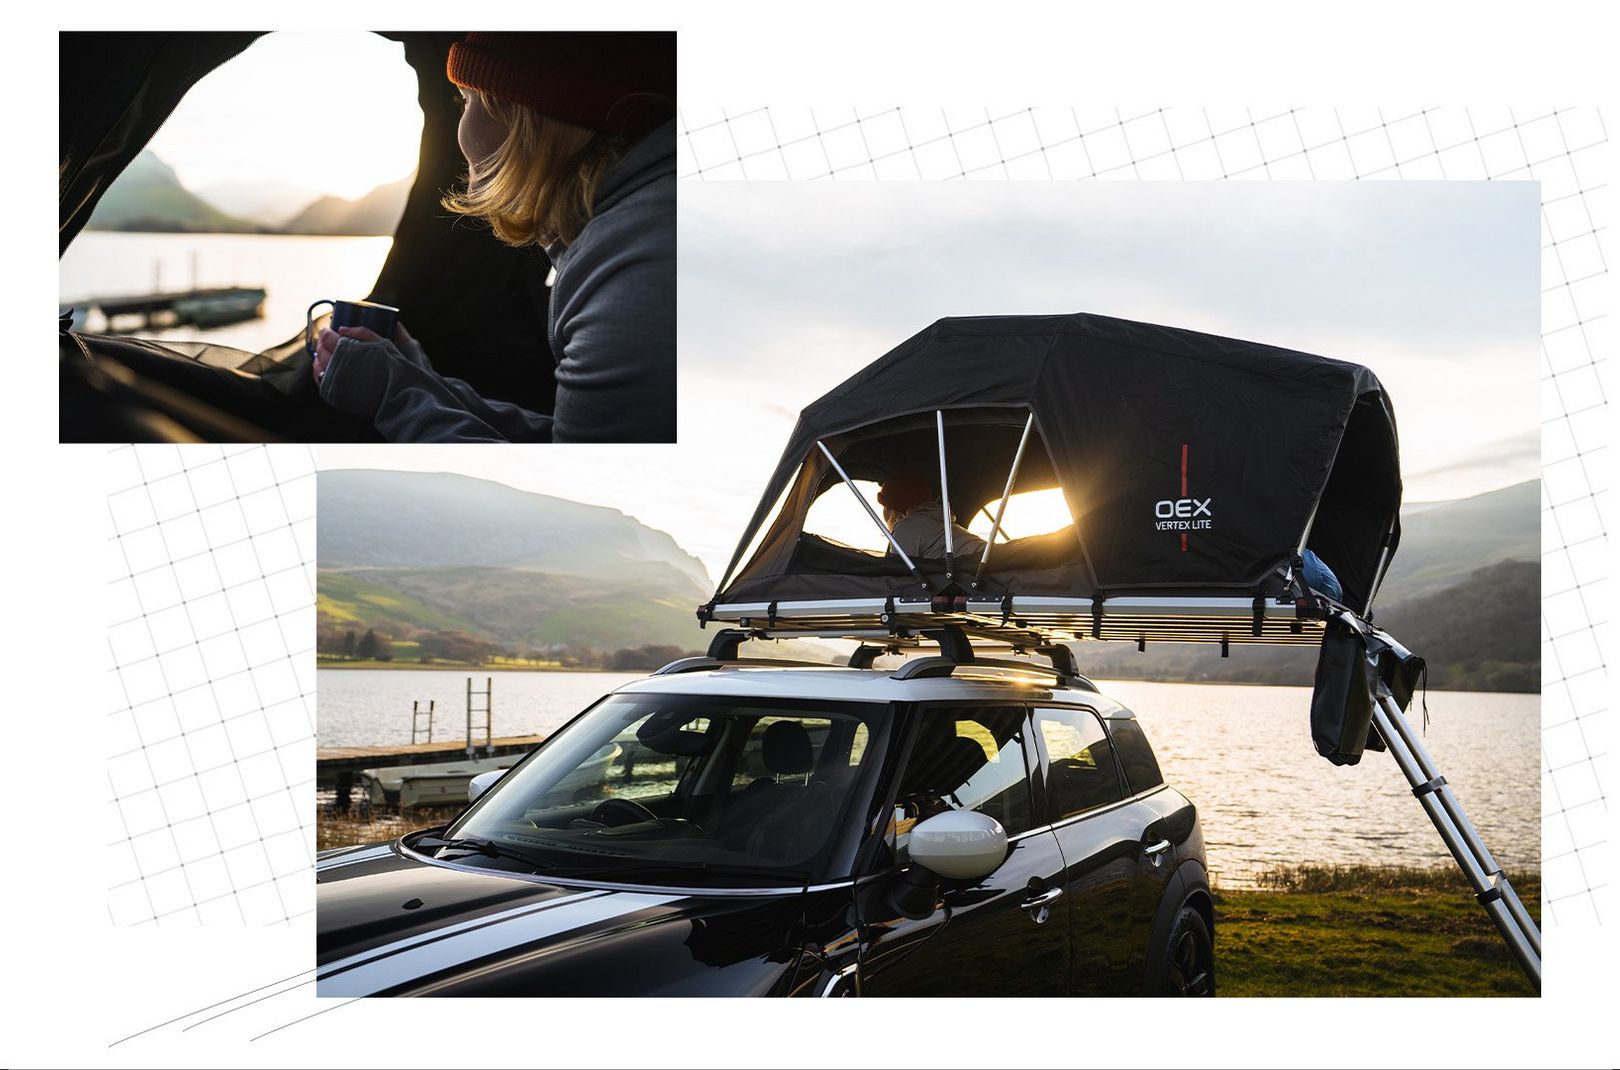 The OEX Roof tent parked up by a lake in Wales while the sun rises over a hill